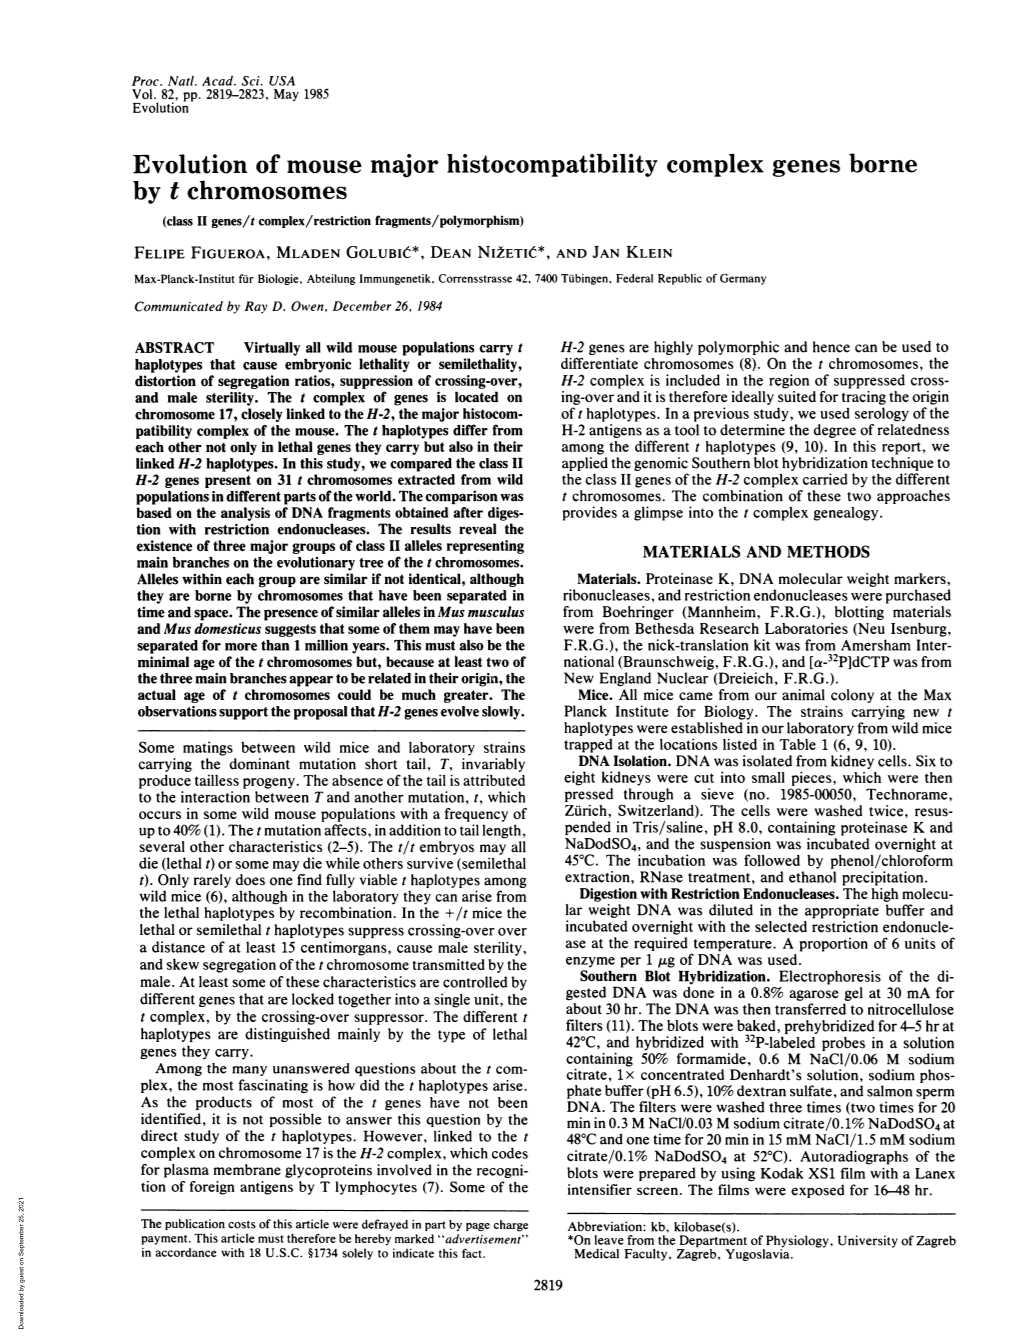 Evolution of Mouse Major Histocompatibility Complex Genes Borne by T Chromosomes (Class II Genes/T Complex/Restriction Fragments/Polymorphism)